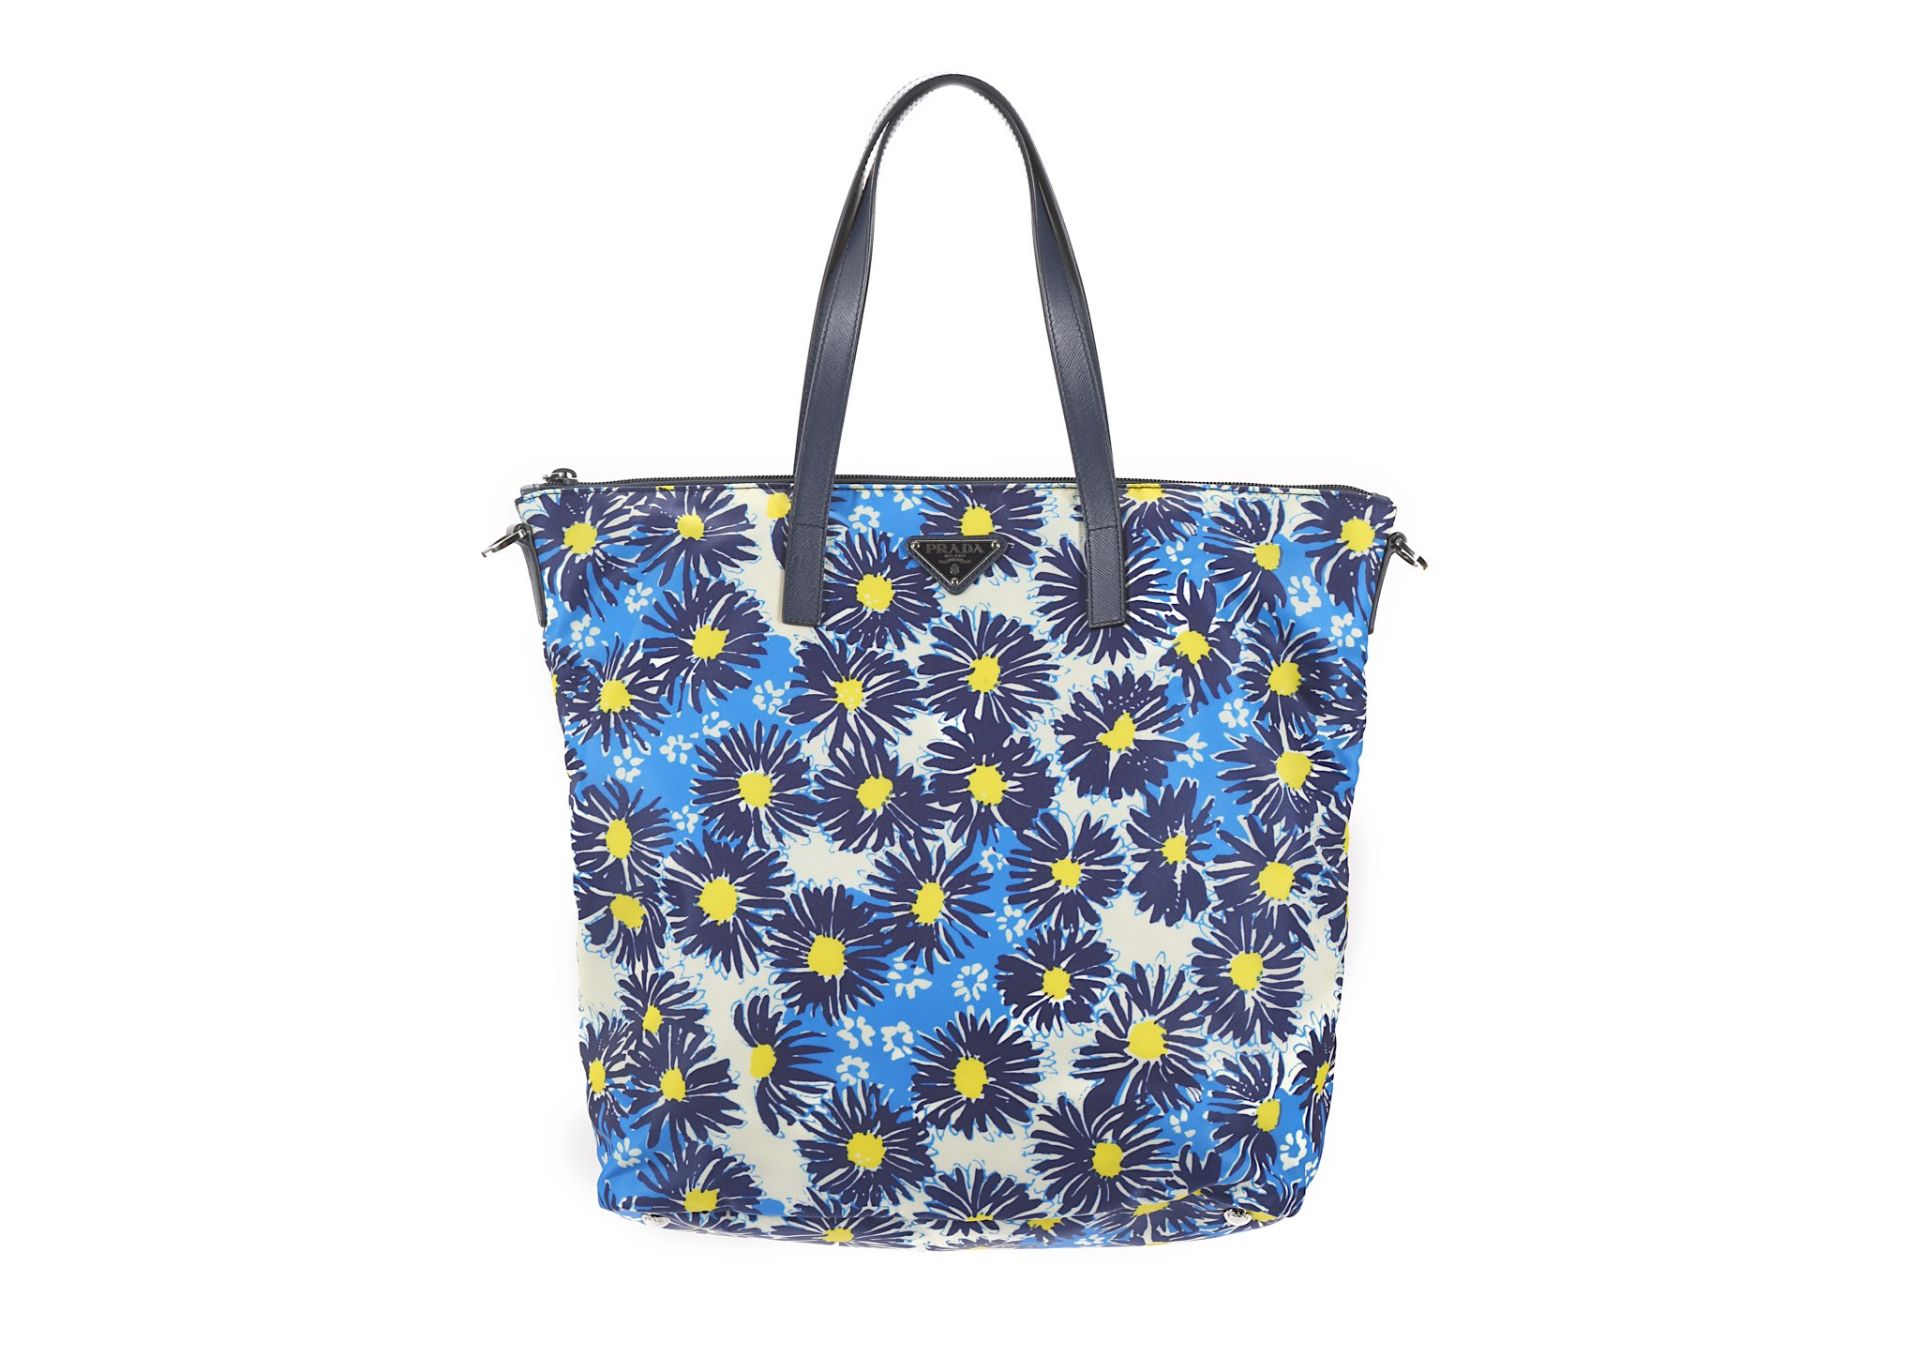 Prada Blue Floral Nylon Shopper, c. 2016, nylon printed with blue and yellow flower heads, blue